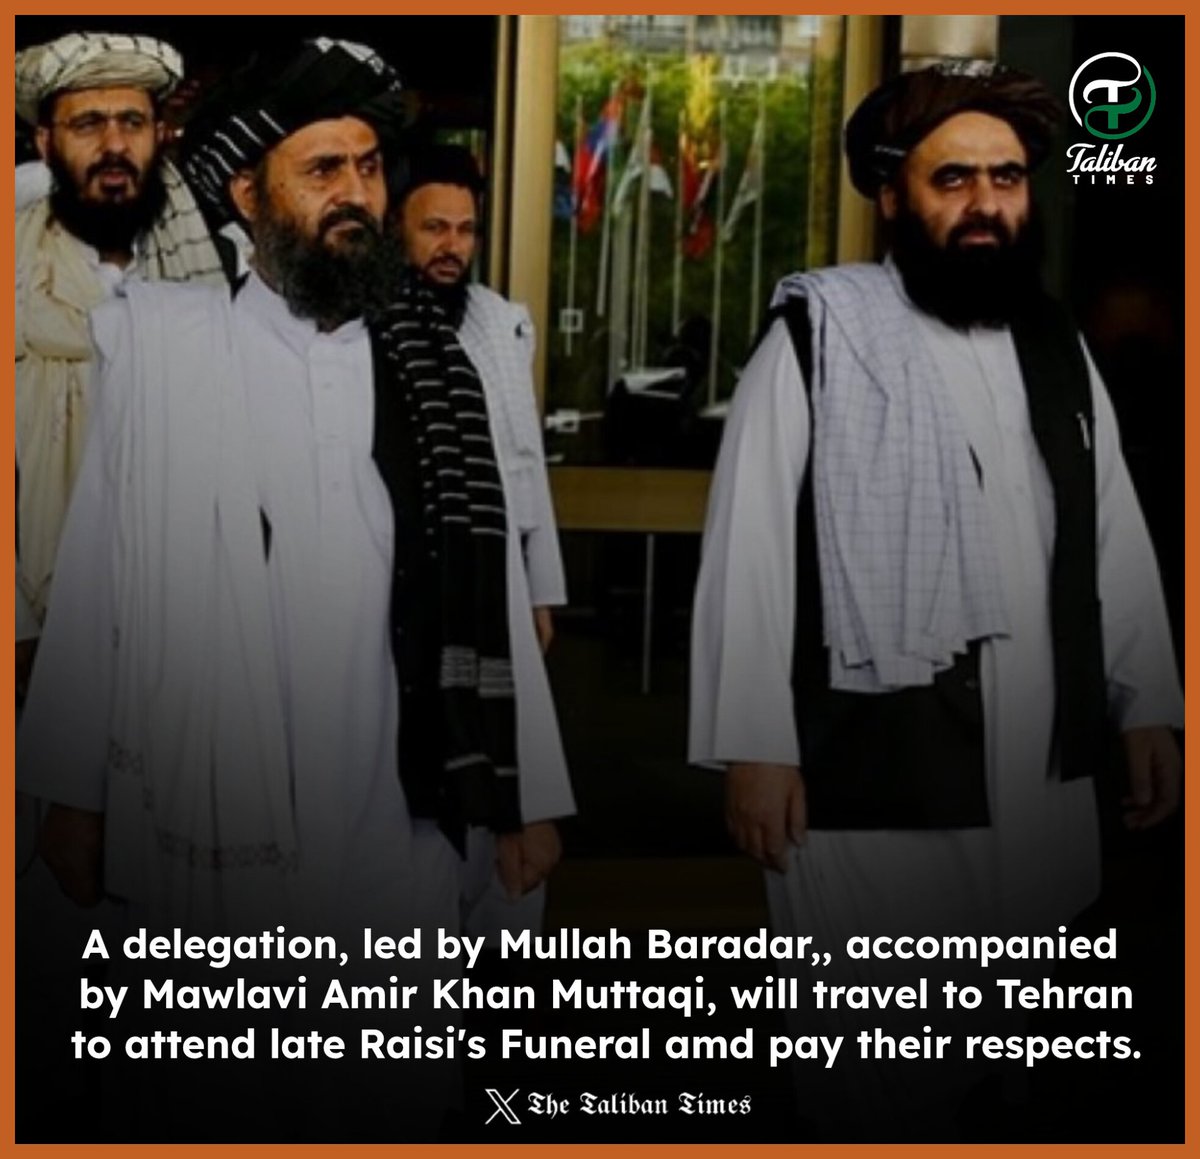 The #Islamic_Emirate of #Afghanistan has announced its participation in the funeral ceremony of the late President of Iran, Ibrahim Raisi. 

A delegation, led by Mullah Baradar, the Deputy PM for Economic affairs, accompanied by Mawlavi Amir Khan Muttaqi will travel to #Tehran.